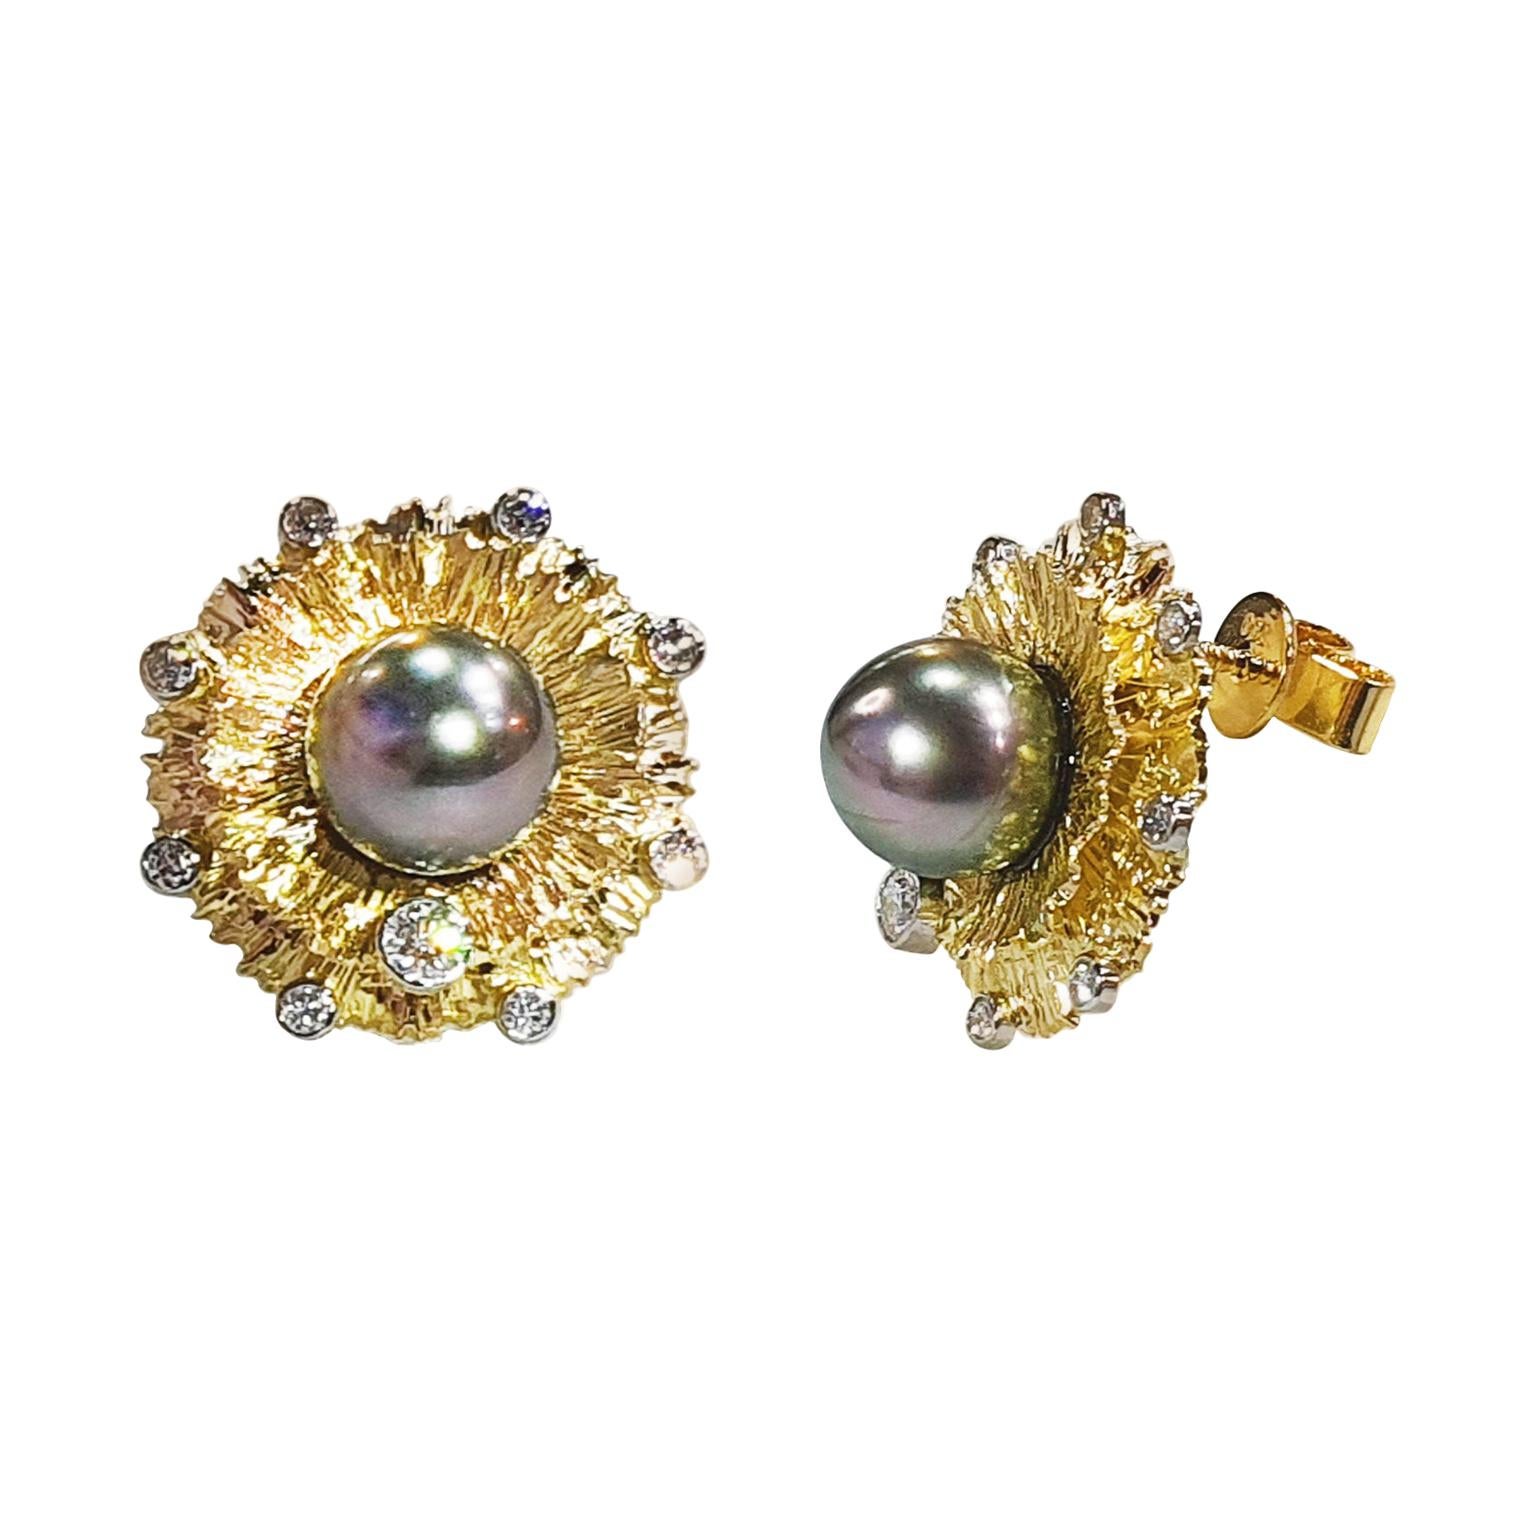 Paul Amey 18k Gold, Diamond and Black Pearl "Carnation" Stud Earrings For Sale